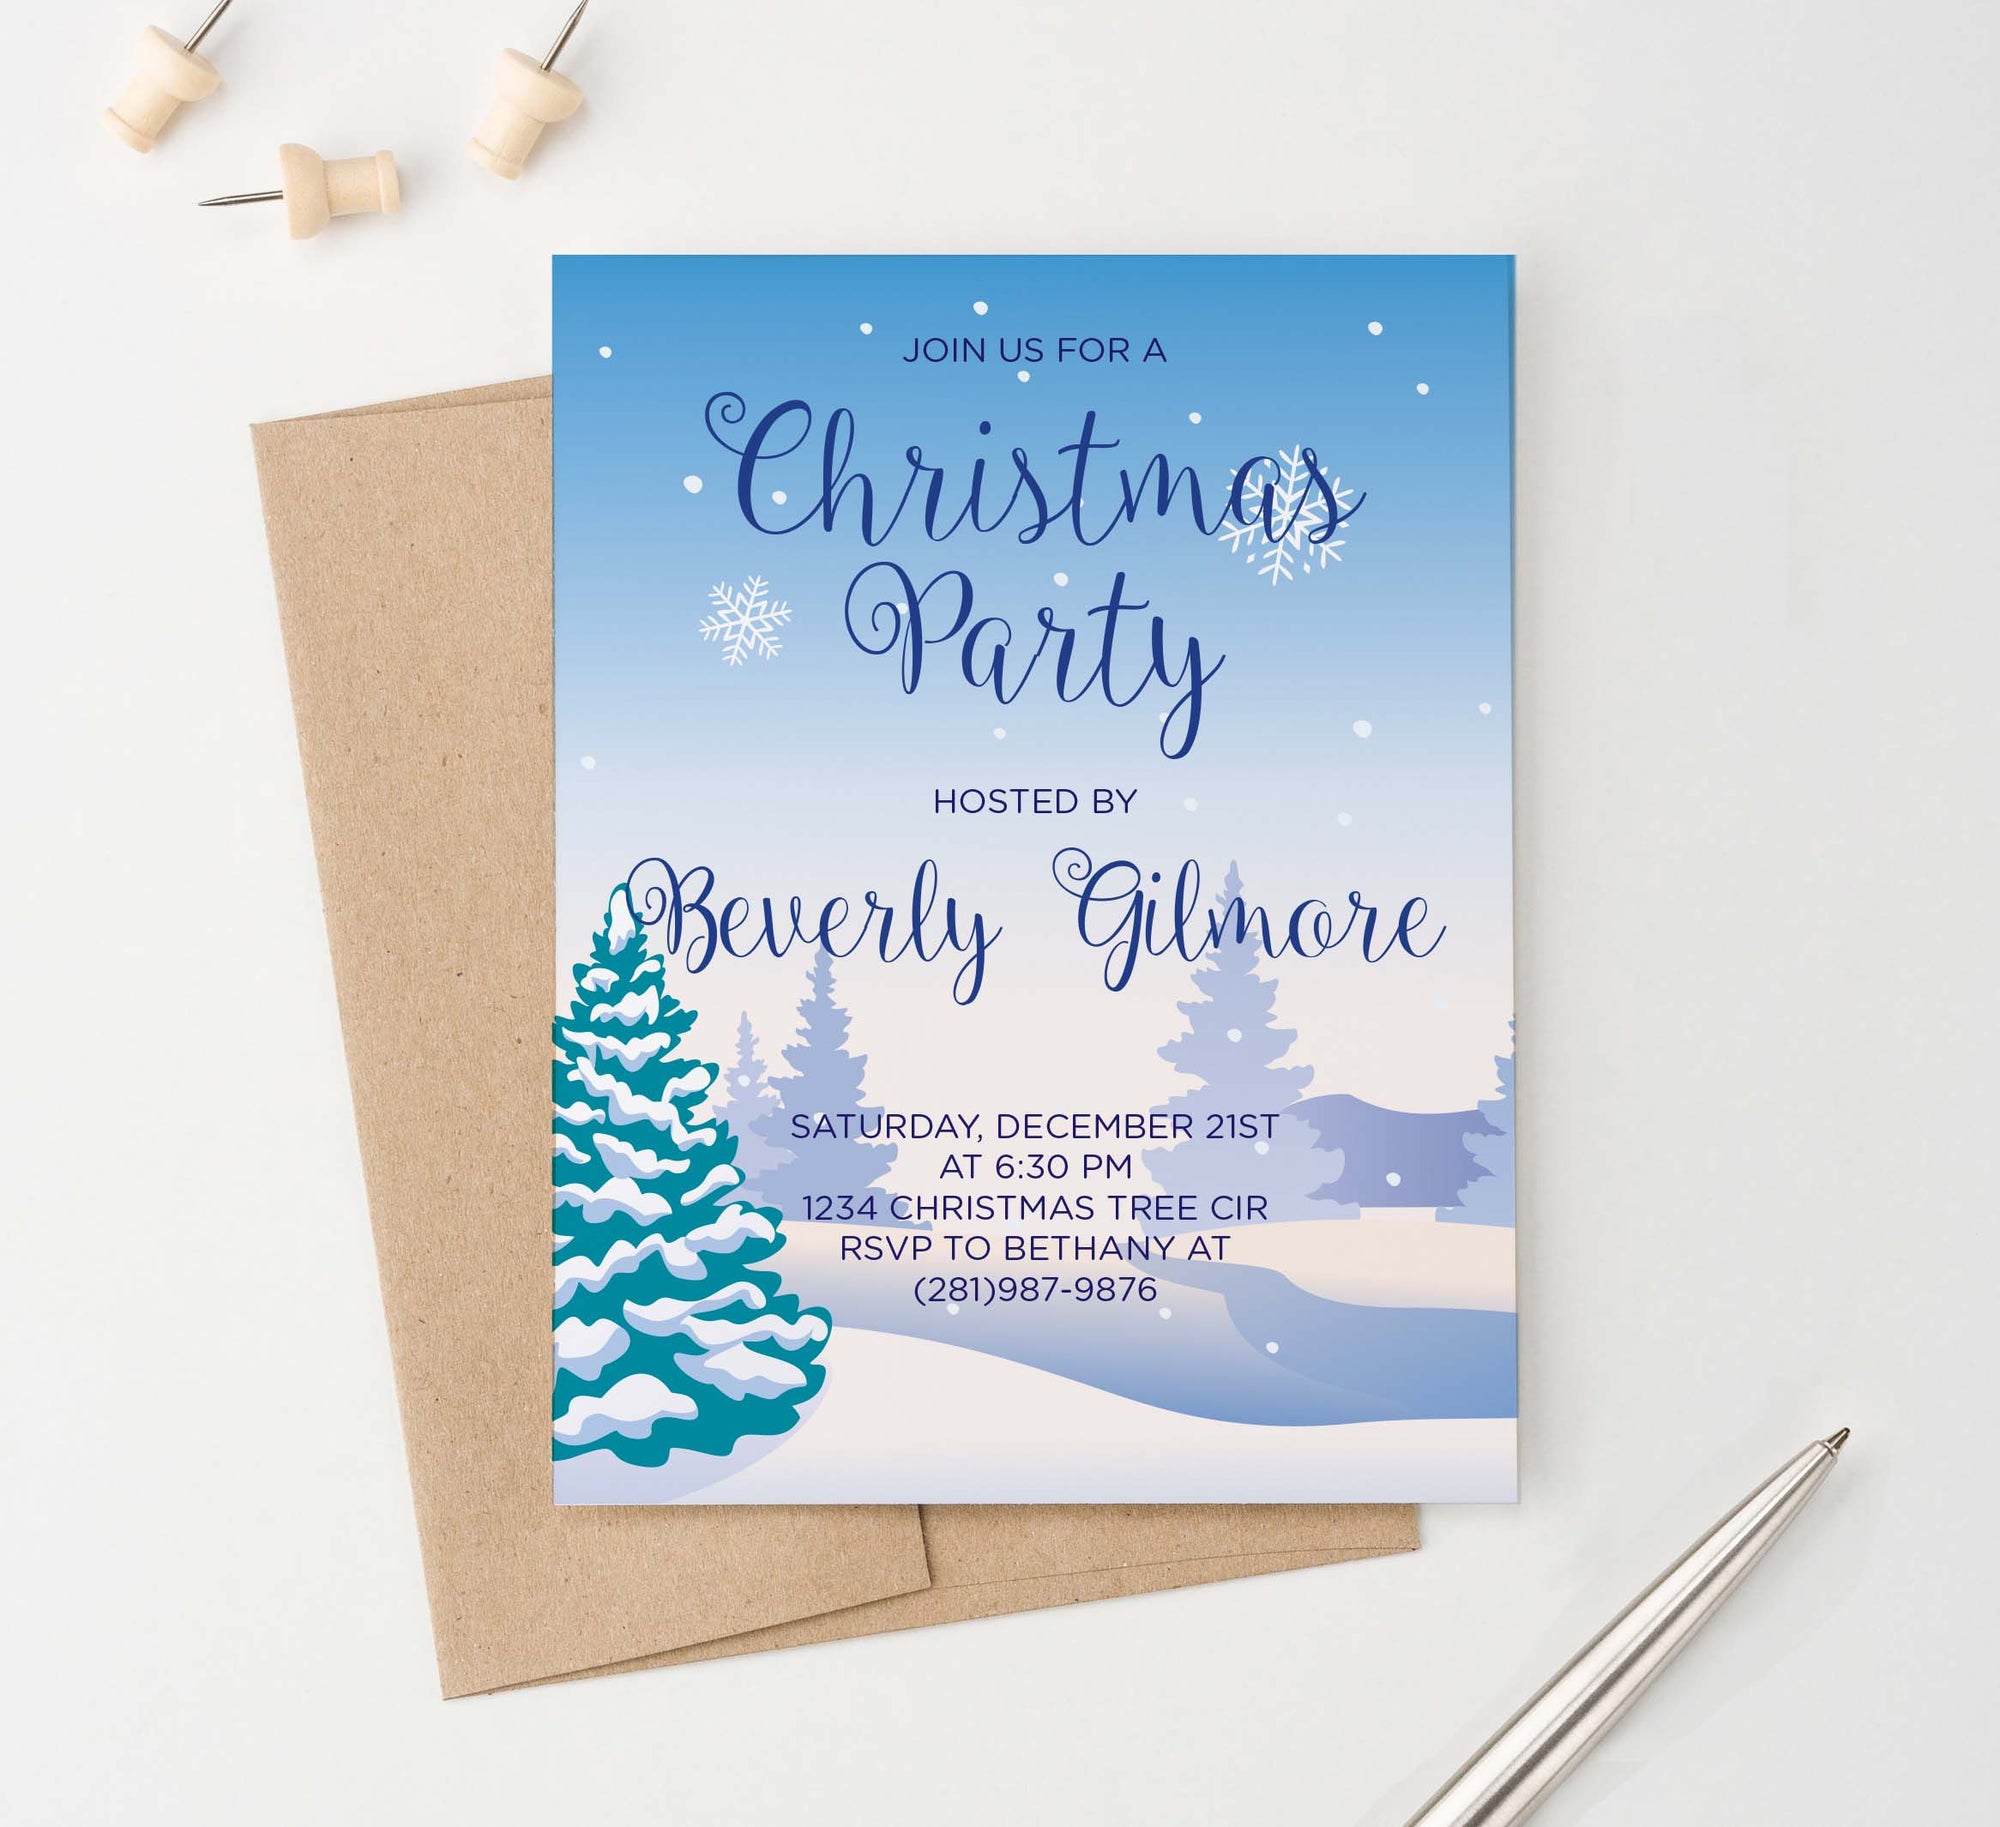 CPI004 snow personalized holiday party invitation with pine trees snowflakes landscape 2